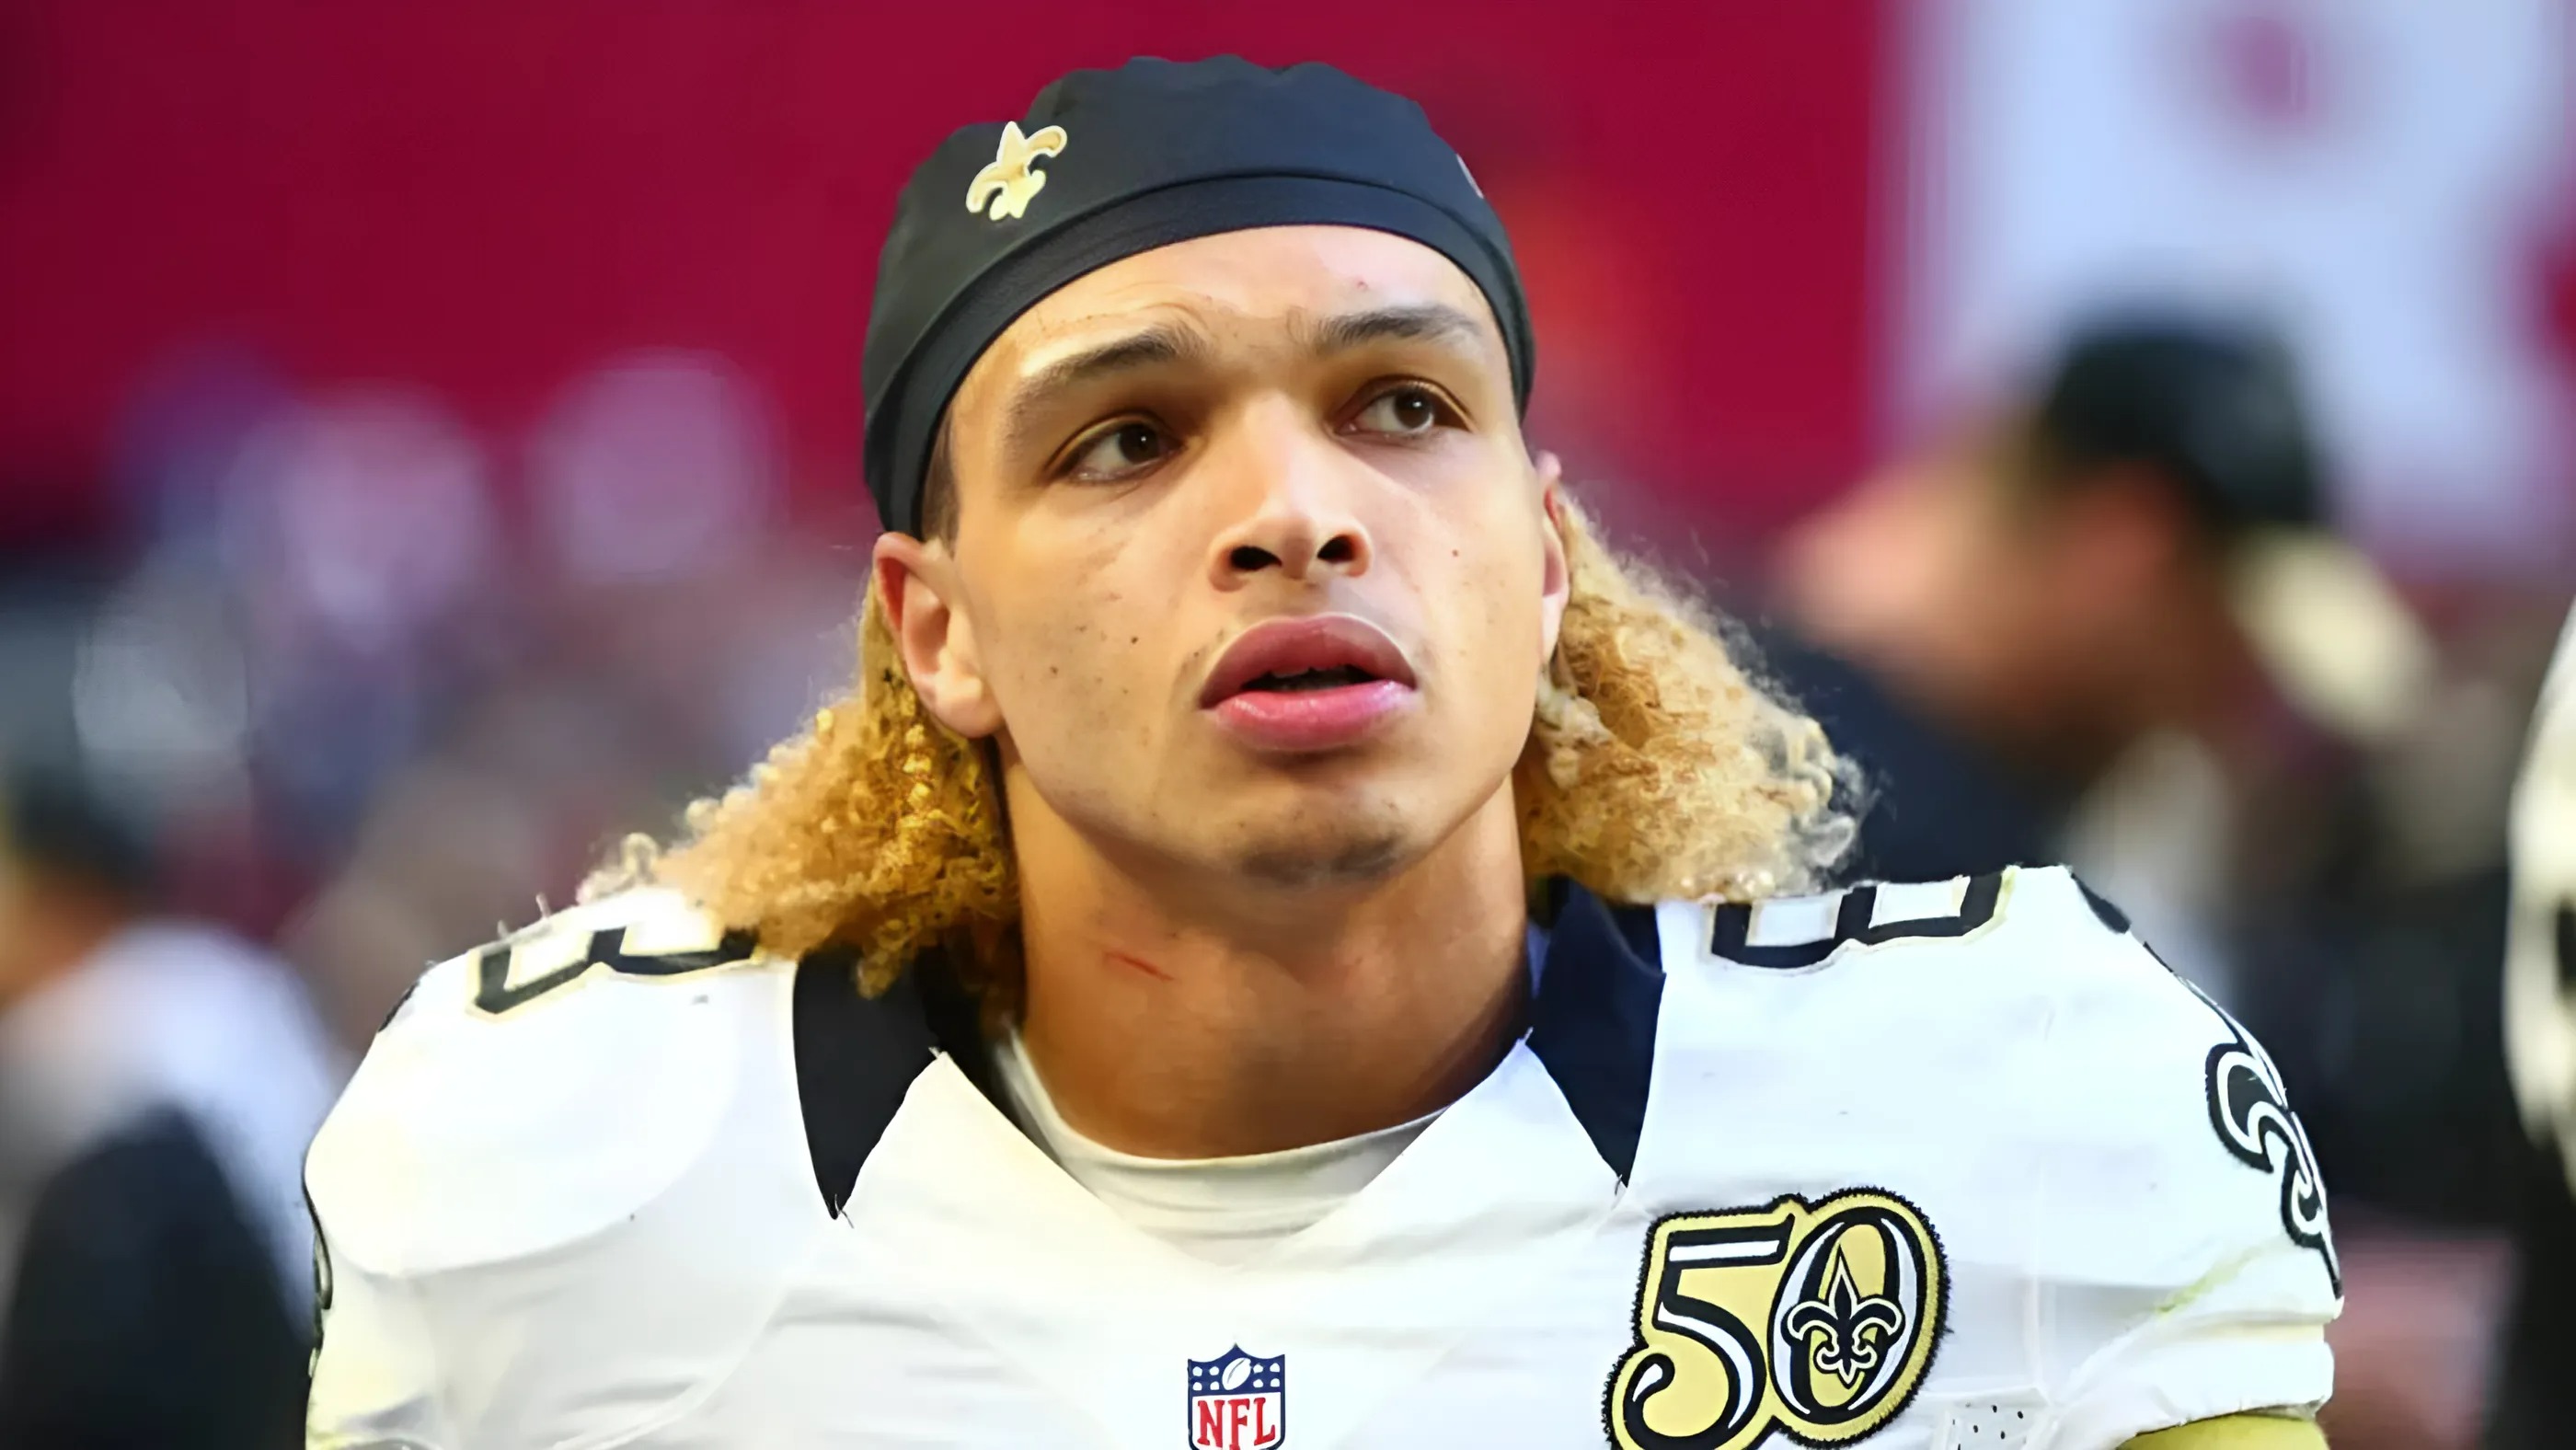 #1 Former Saints WR sends thank you message to New Orleans Saints in social media rant